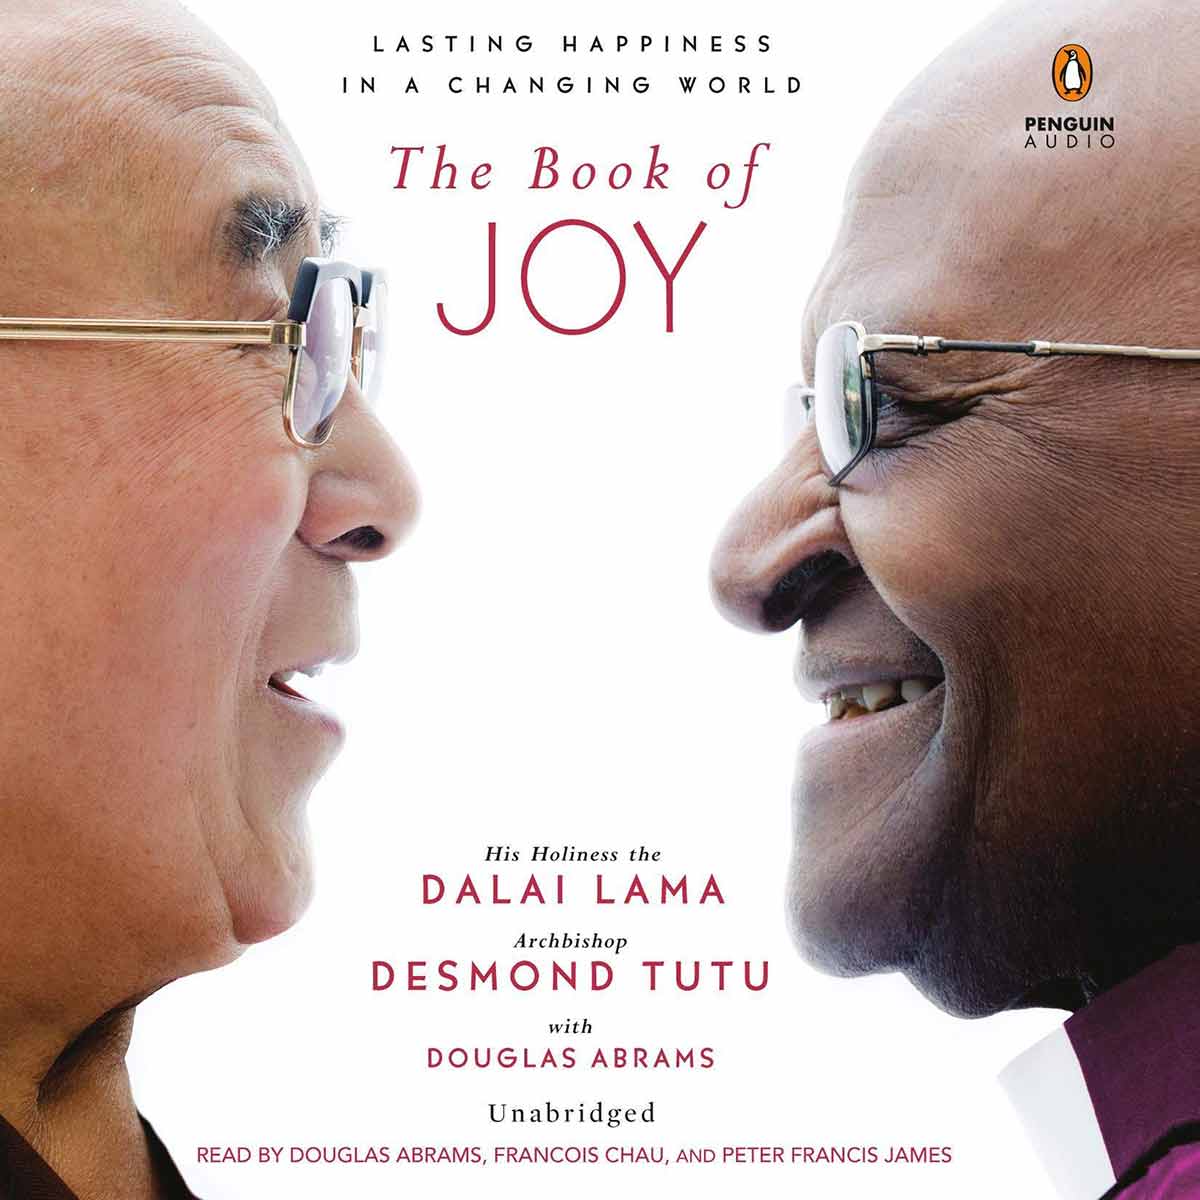 The cover of The Book of Joy